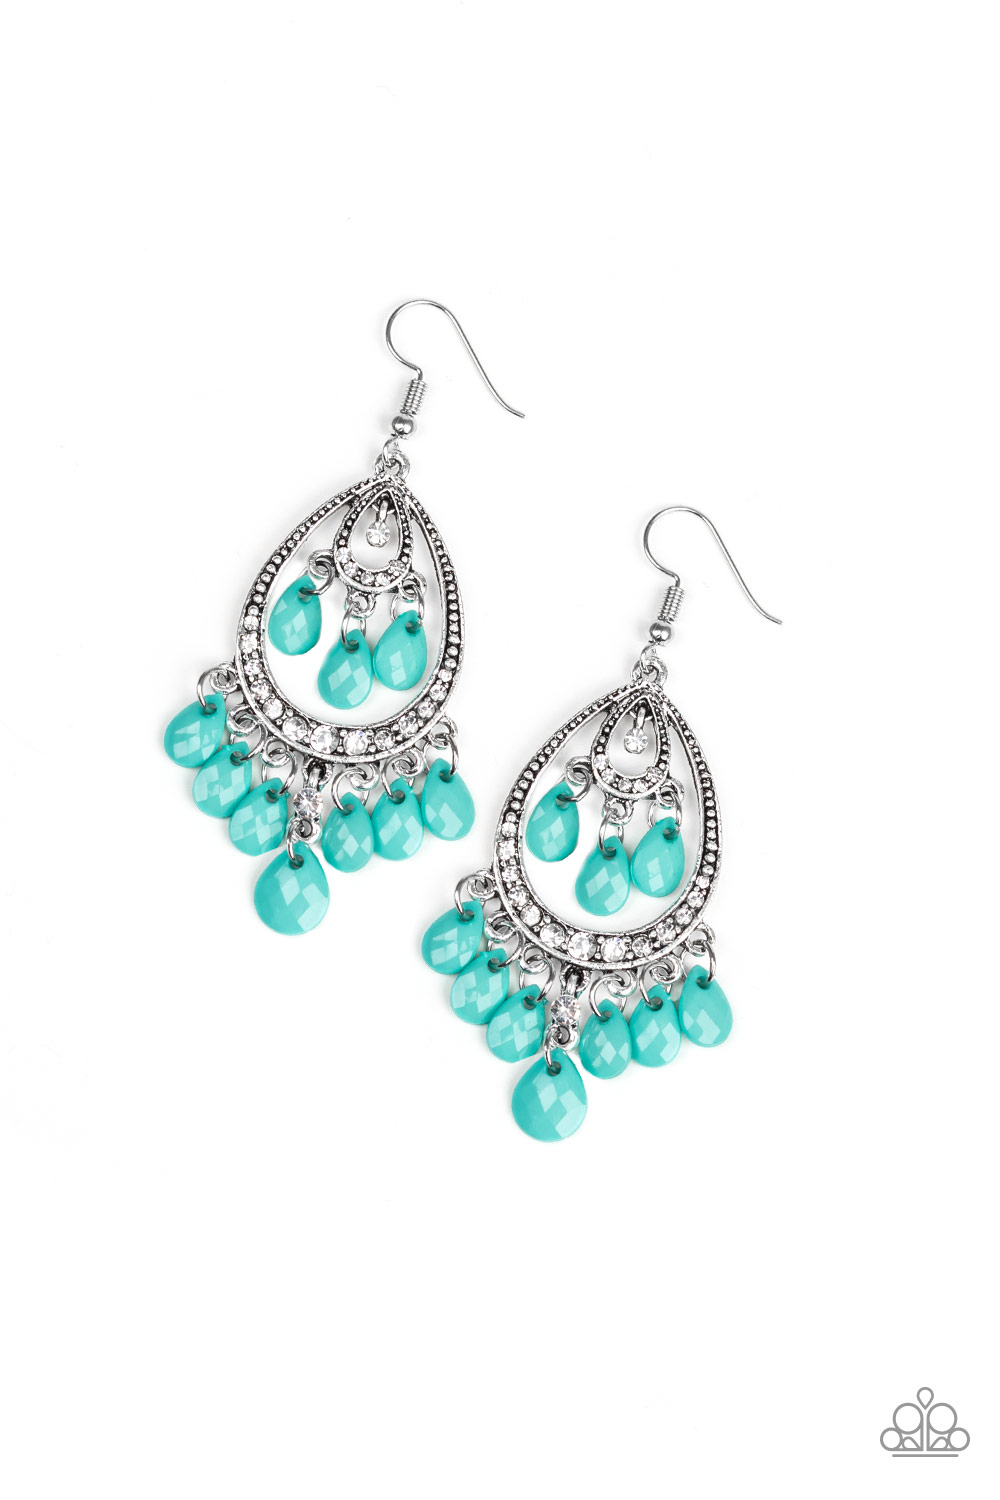 Paparazzi Gorgeously Genie Blue Earrings - Christine's Bling Fling Boutique